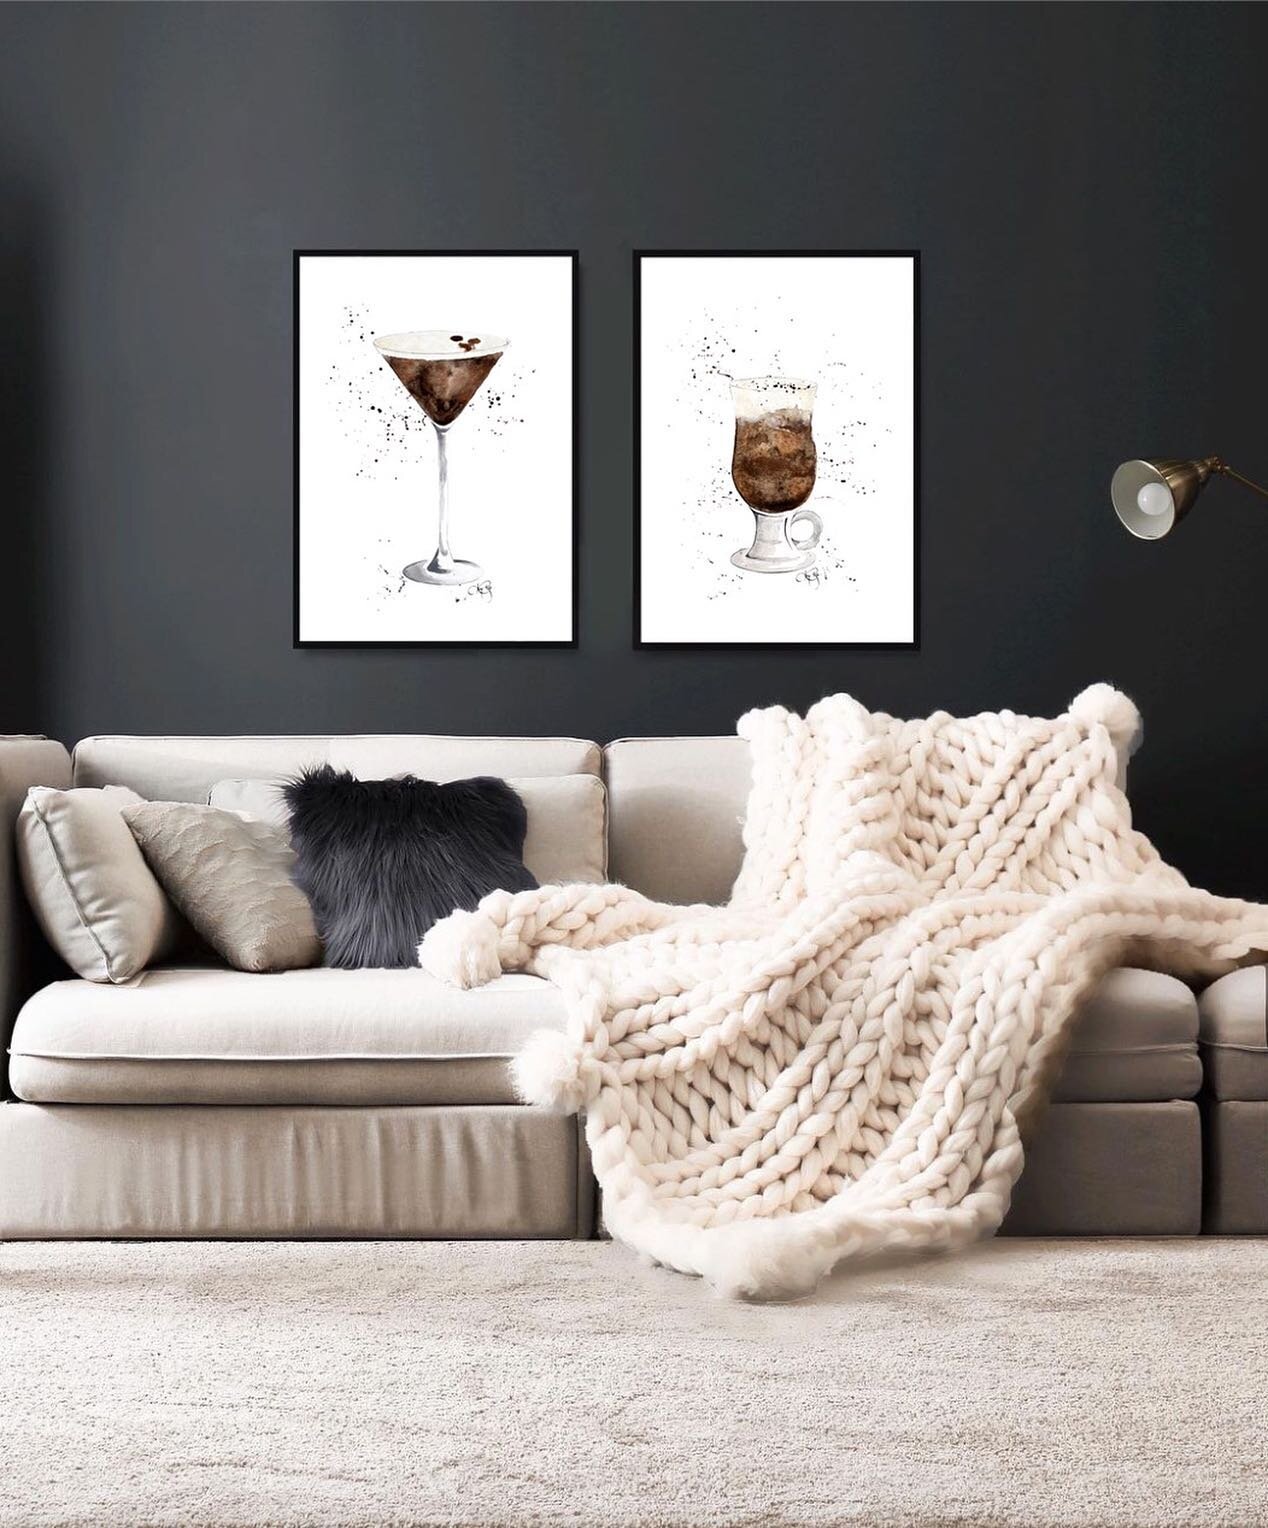 I prefer my espresso in a martini and my coffee Irish ☕️ the perfect coffee collaboration from The Cocktail Club Collection, available through our Instagram shop and at amyelisestudio.co.uk 🖥
⠀⠀⠀⠀⠀⠀⠀⠀⠀
⠀⠀⠀⠀⠀⠀⠀⠀⠀
⠀⠀⠀⠀⠀⠀⠀⠀⠀
#wallart #wallartdecor #int